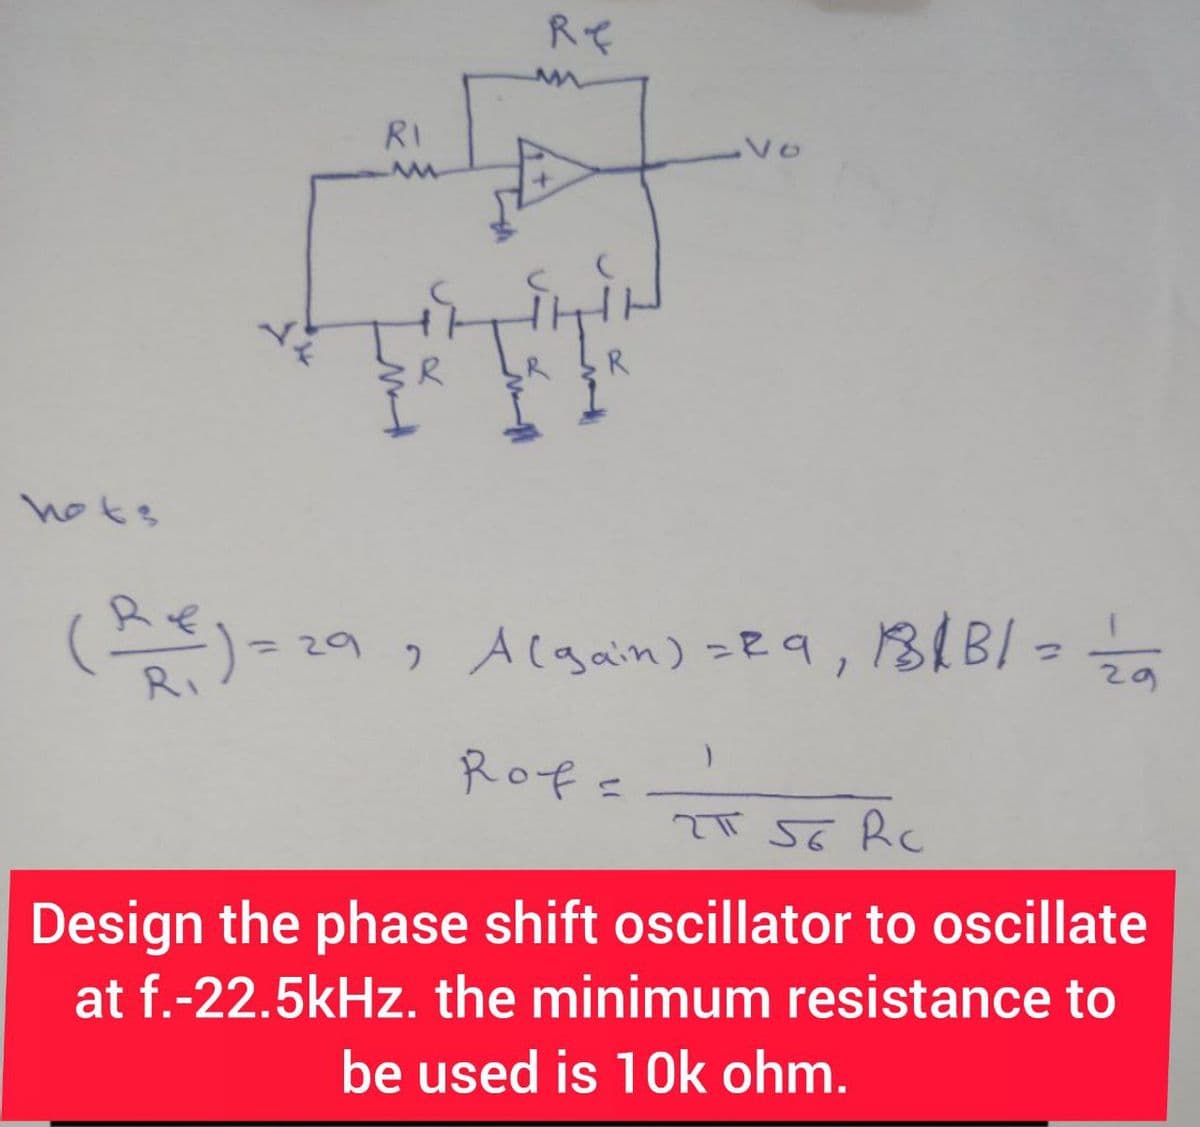 hots
RI
Re
R
Vo
(Re) = 29, A (gain) = 29, 181B/= 12/0
Rof=
2T 56 Rc
Design the phase shift oscillator to oscillate
at f.-22.5kHz. the minimum resistance to
be used is 10k ohm.